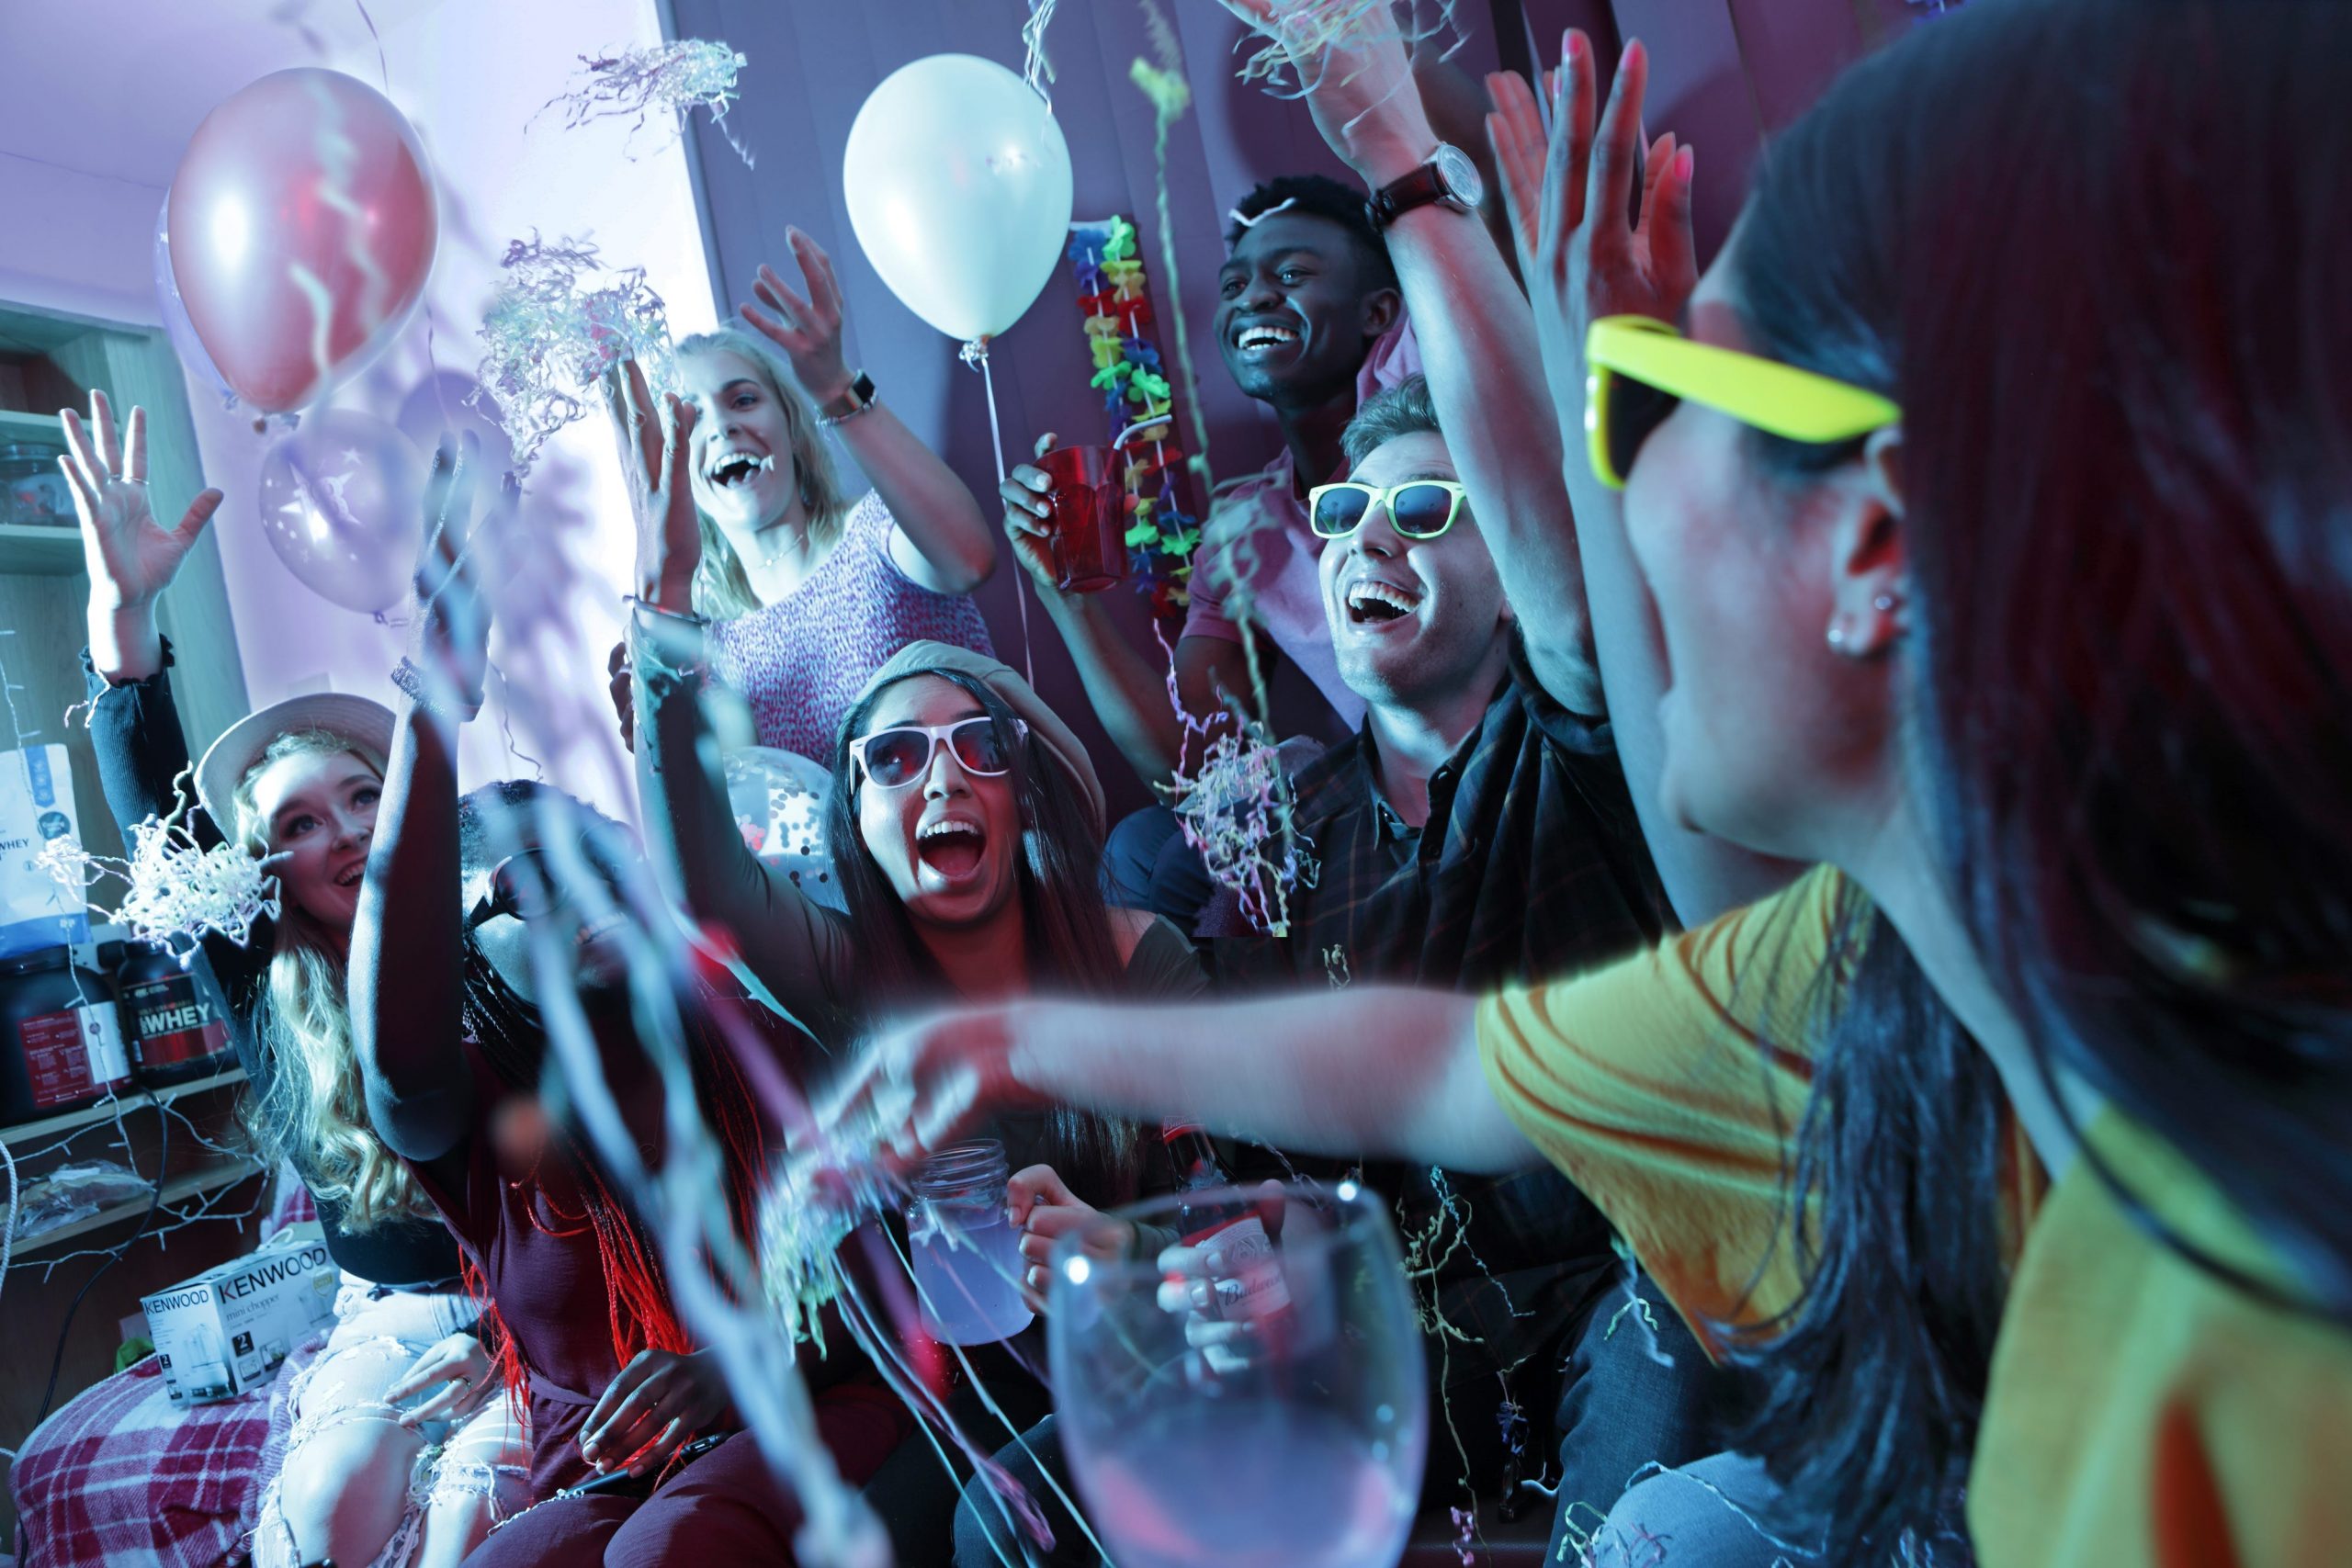 Young people wearing neon glasses dance and throw balloons around at a house party.